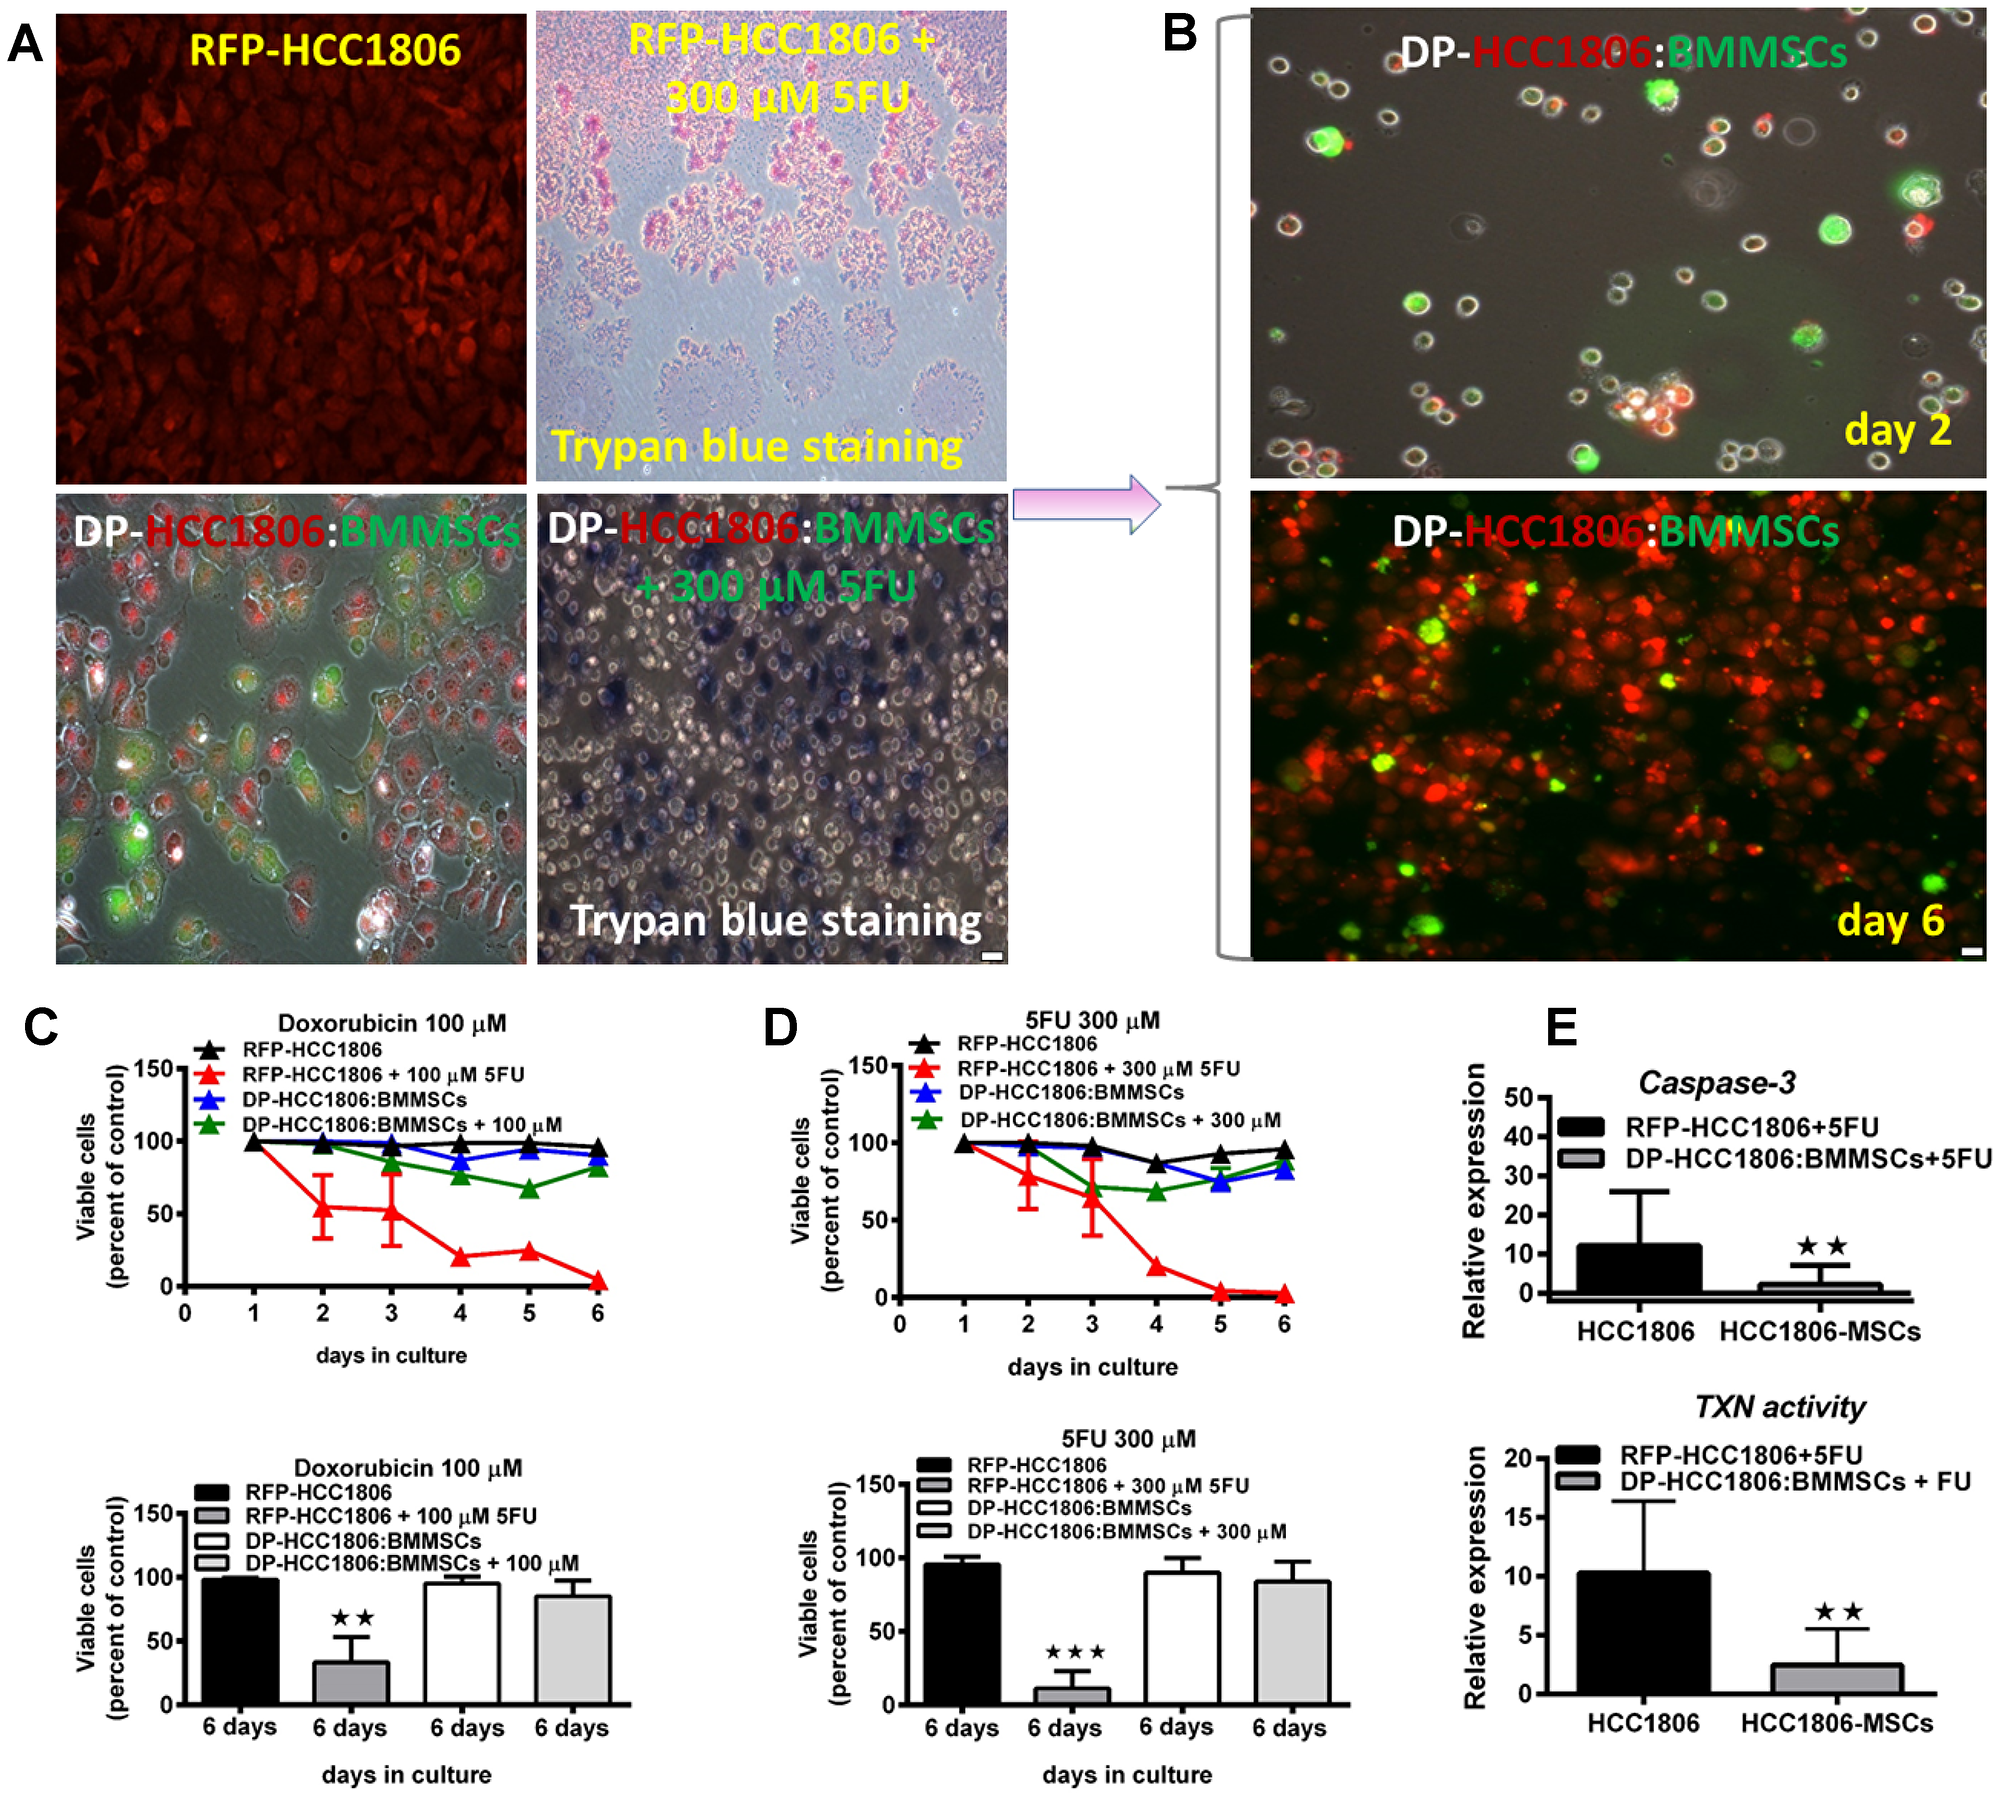 Increased cell viability and reduced cytotoxicity underlie chemoresistance to doxorubicin and 5FU.